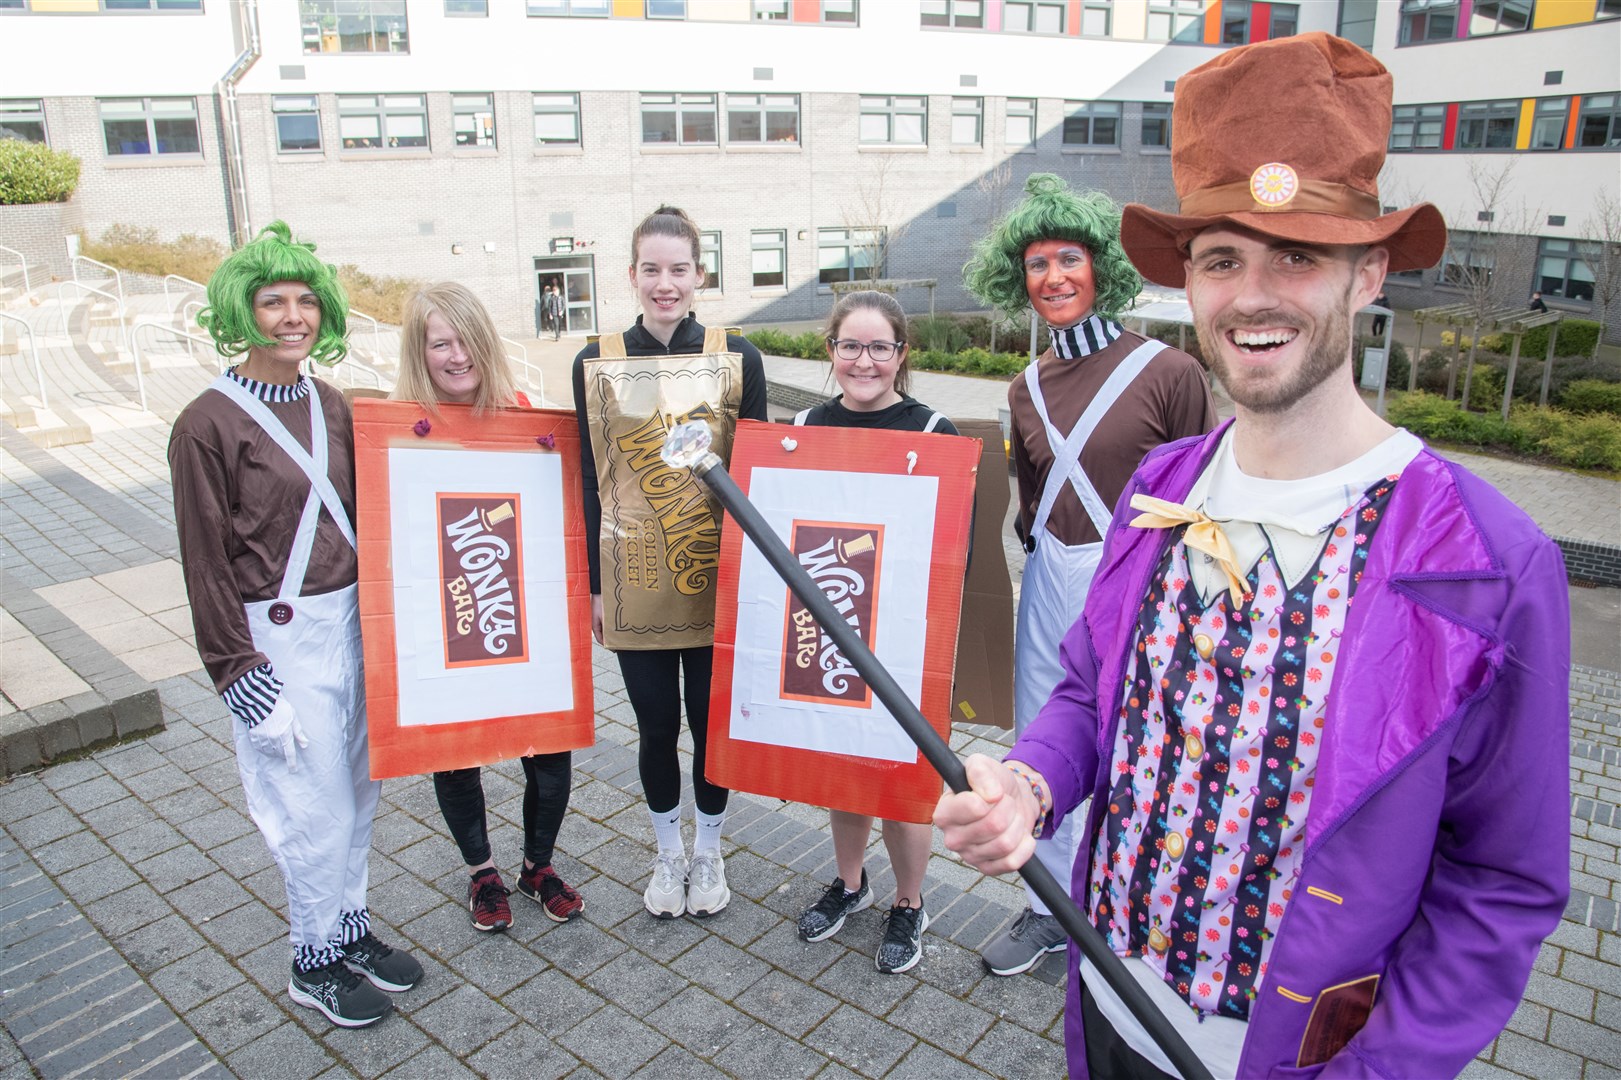 The P.E department came dressed as Charlie and the Chocolate Factory. Picture: Daniel Forsyth